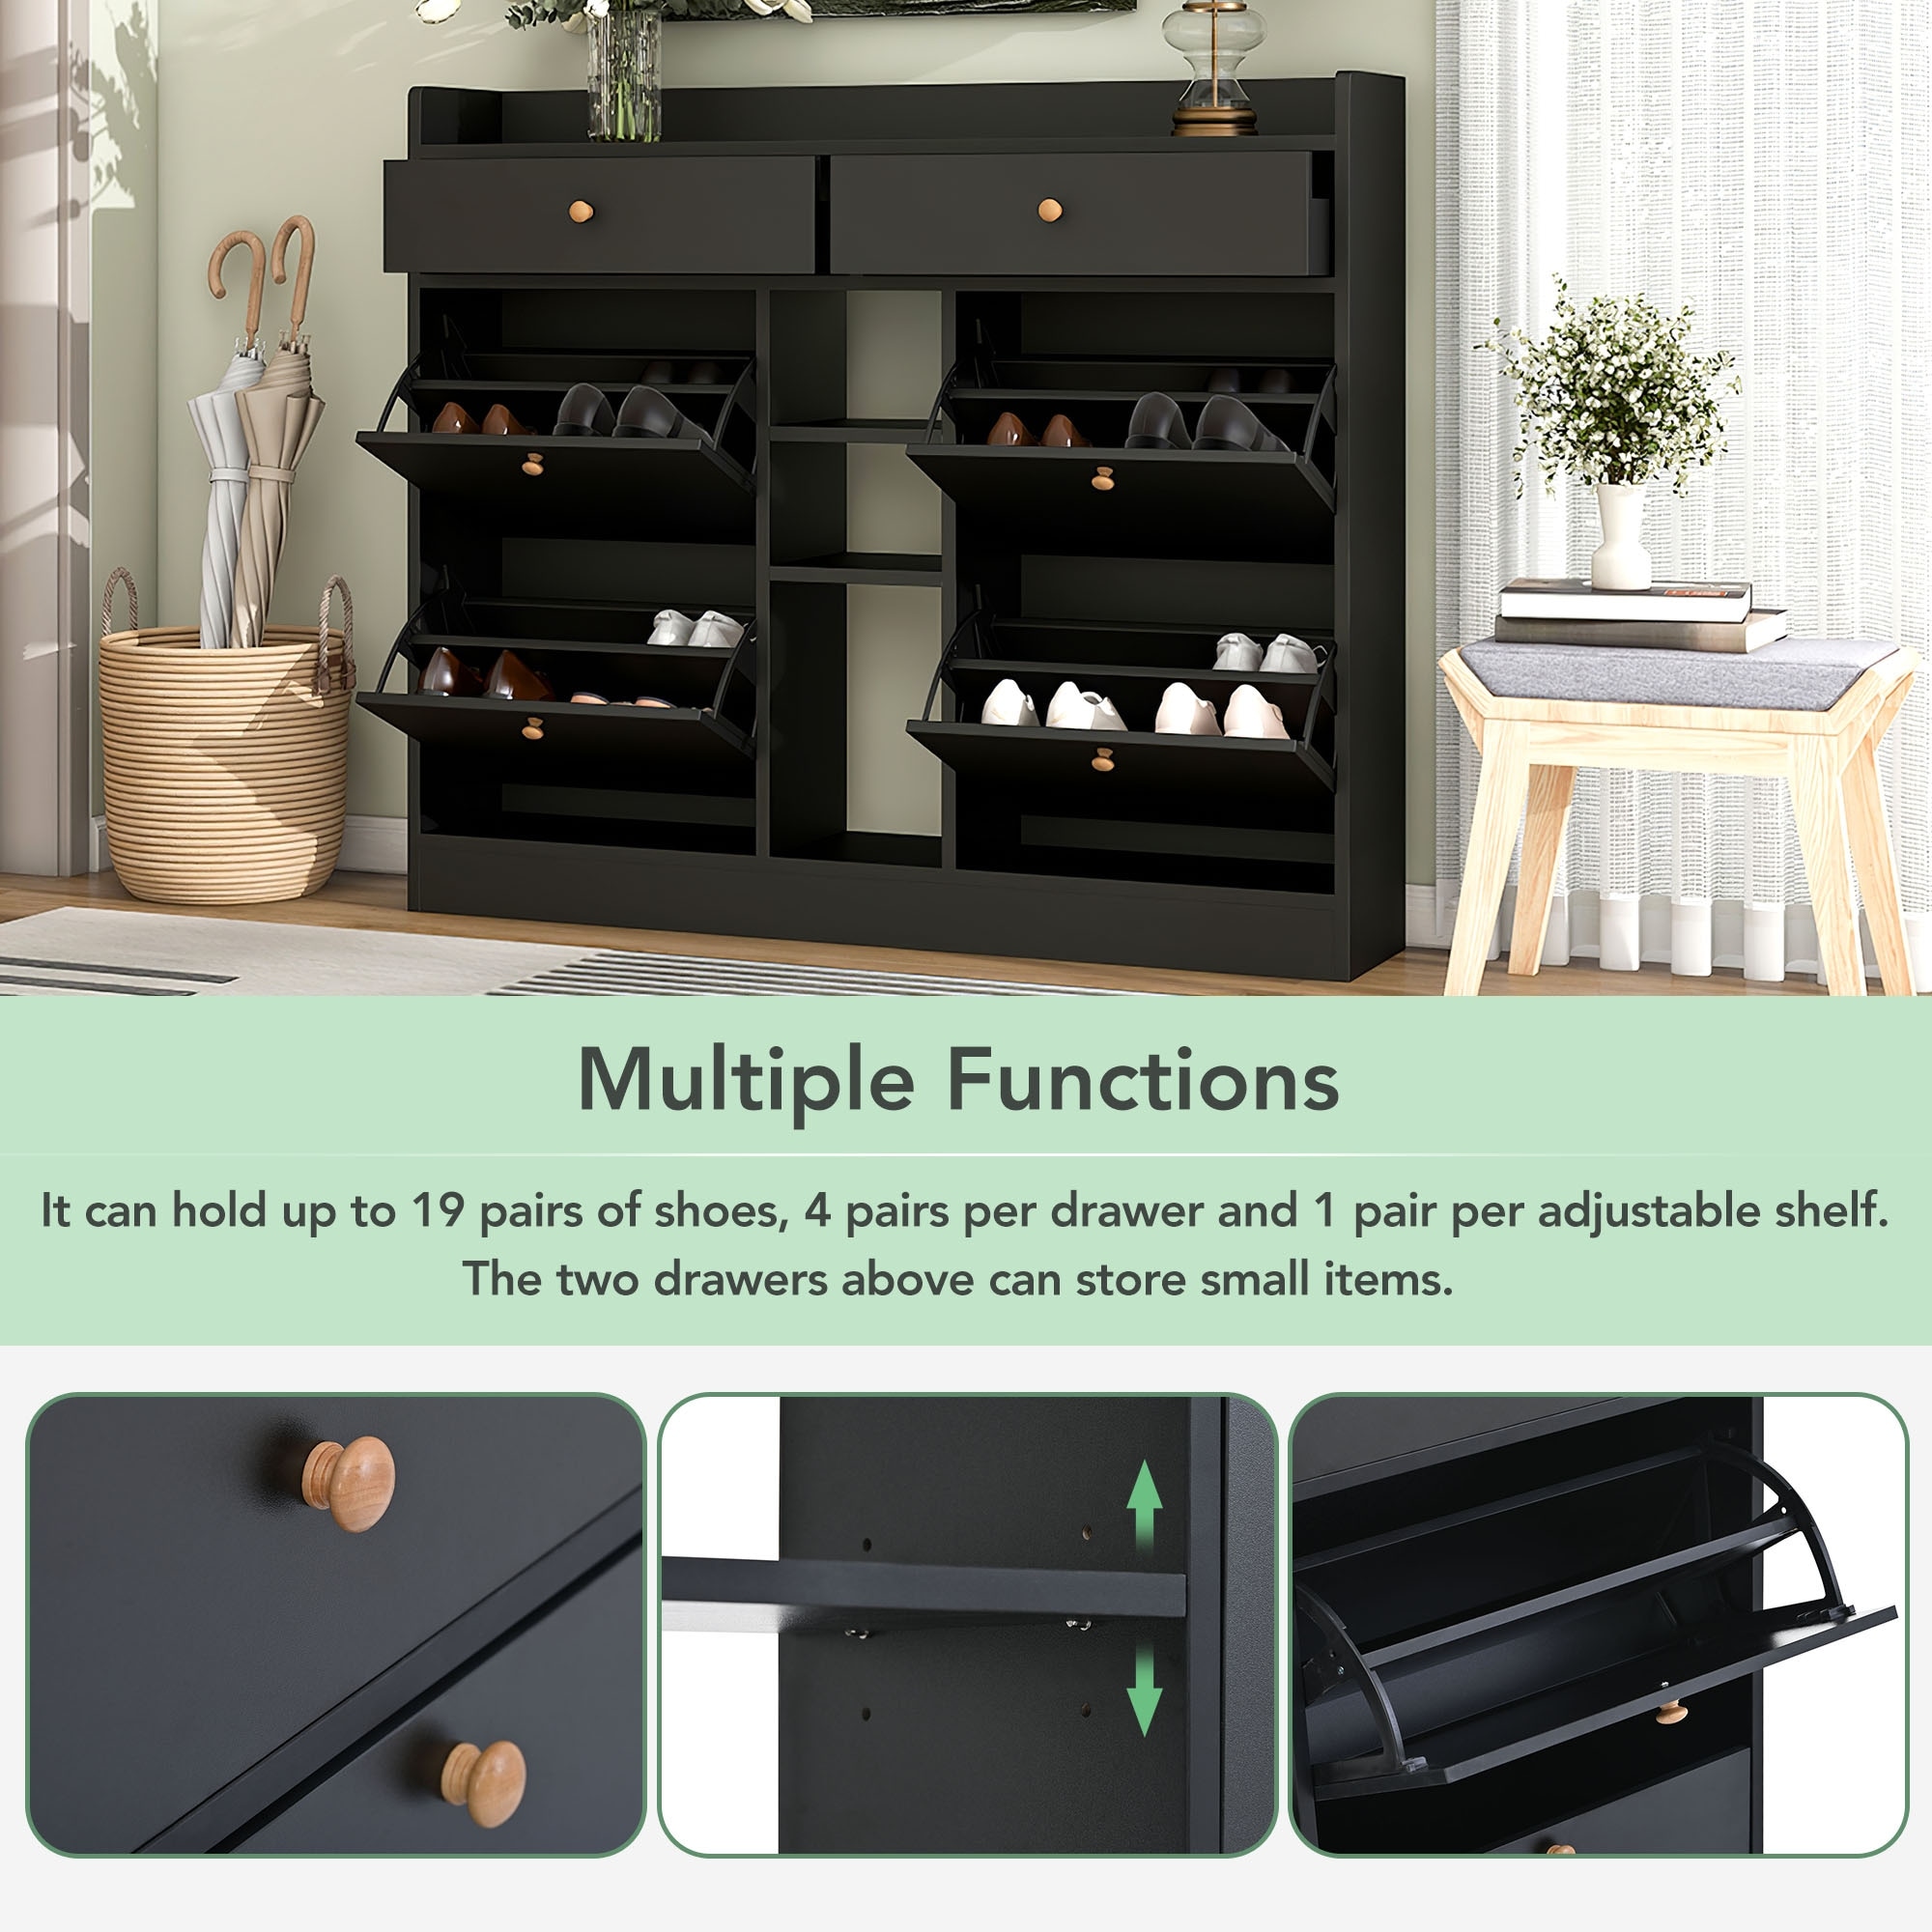 https://ak1.ostkcdn.com/images/products/is/images/direct/0b5f7102329363978de9ebe156e6dd0168ae6a50/Modern-Shoe-Cabinet-with-4-Flip-Drawers%2C-Multifunctional-2-Tier-Free-Standing-Shoe-Rack-with-2-Drawers%2C-for-Entrance-Hallway.jpg